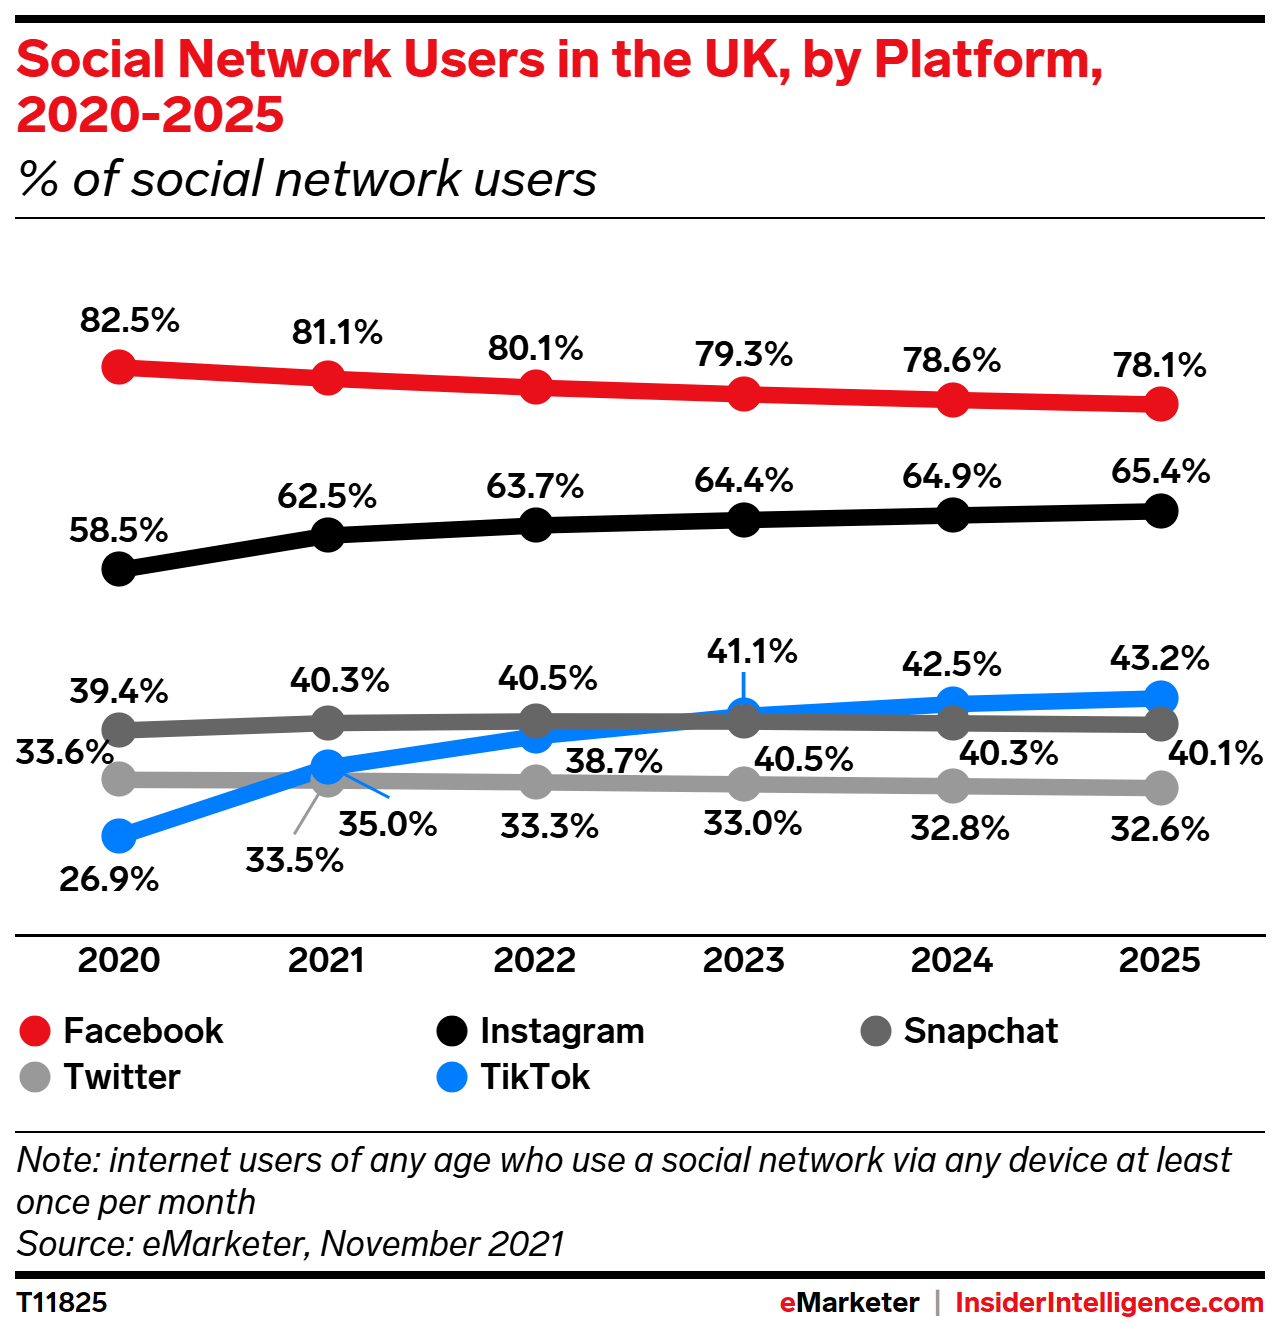 UK Social Network Users, by Platform, 2020-2025 (% of social network users)